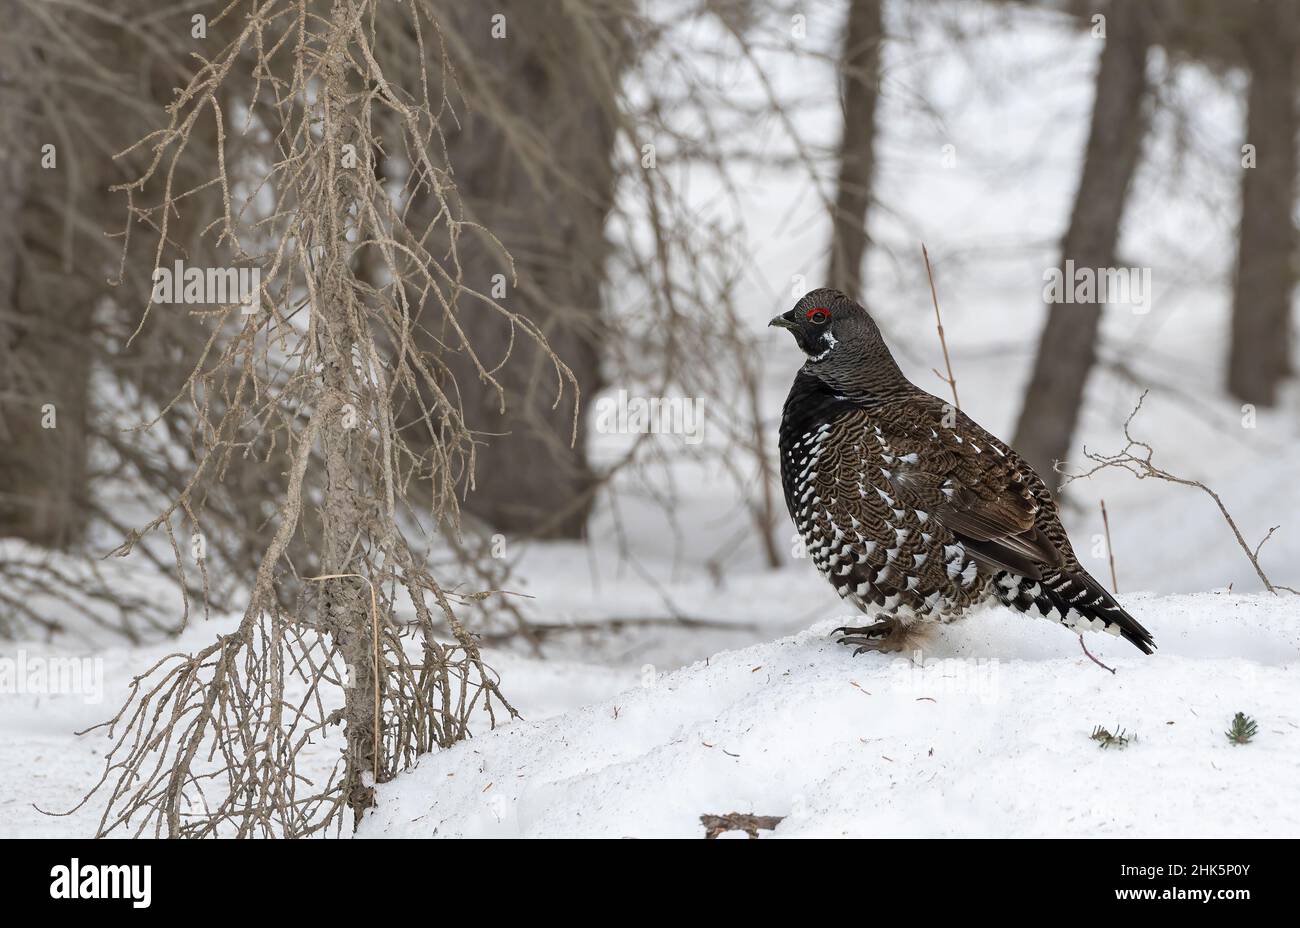 Spruce grouse (Falcipennis canadensis) forraging in snow, Spray Lakes Provincial Park, Kananaskis Country, Alberta, Canada Stock Photo